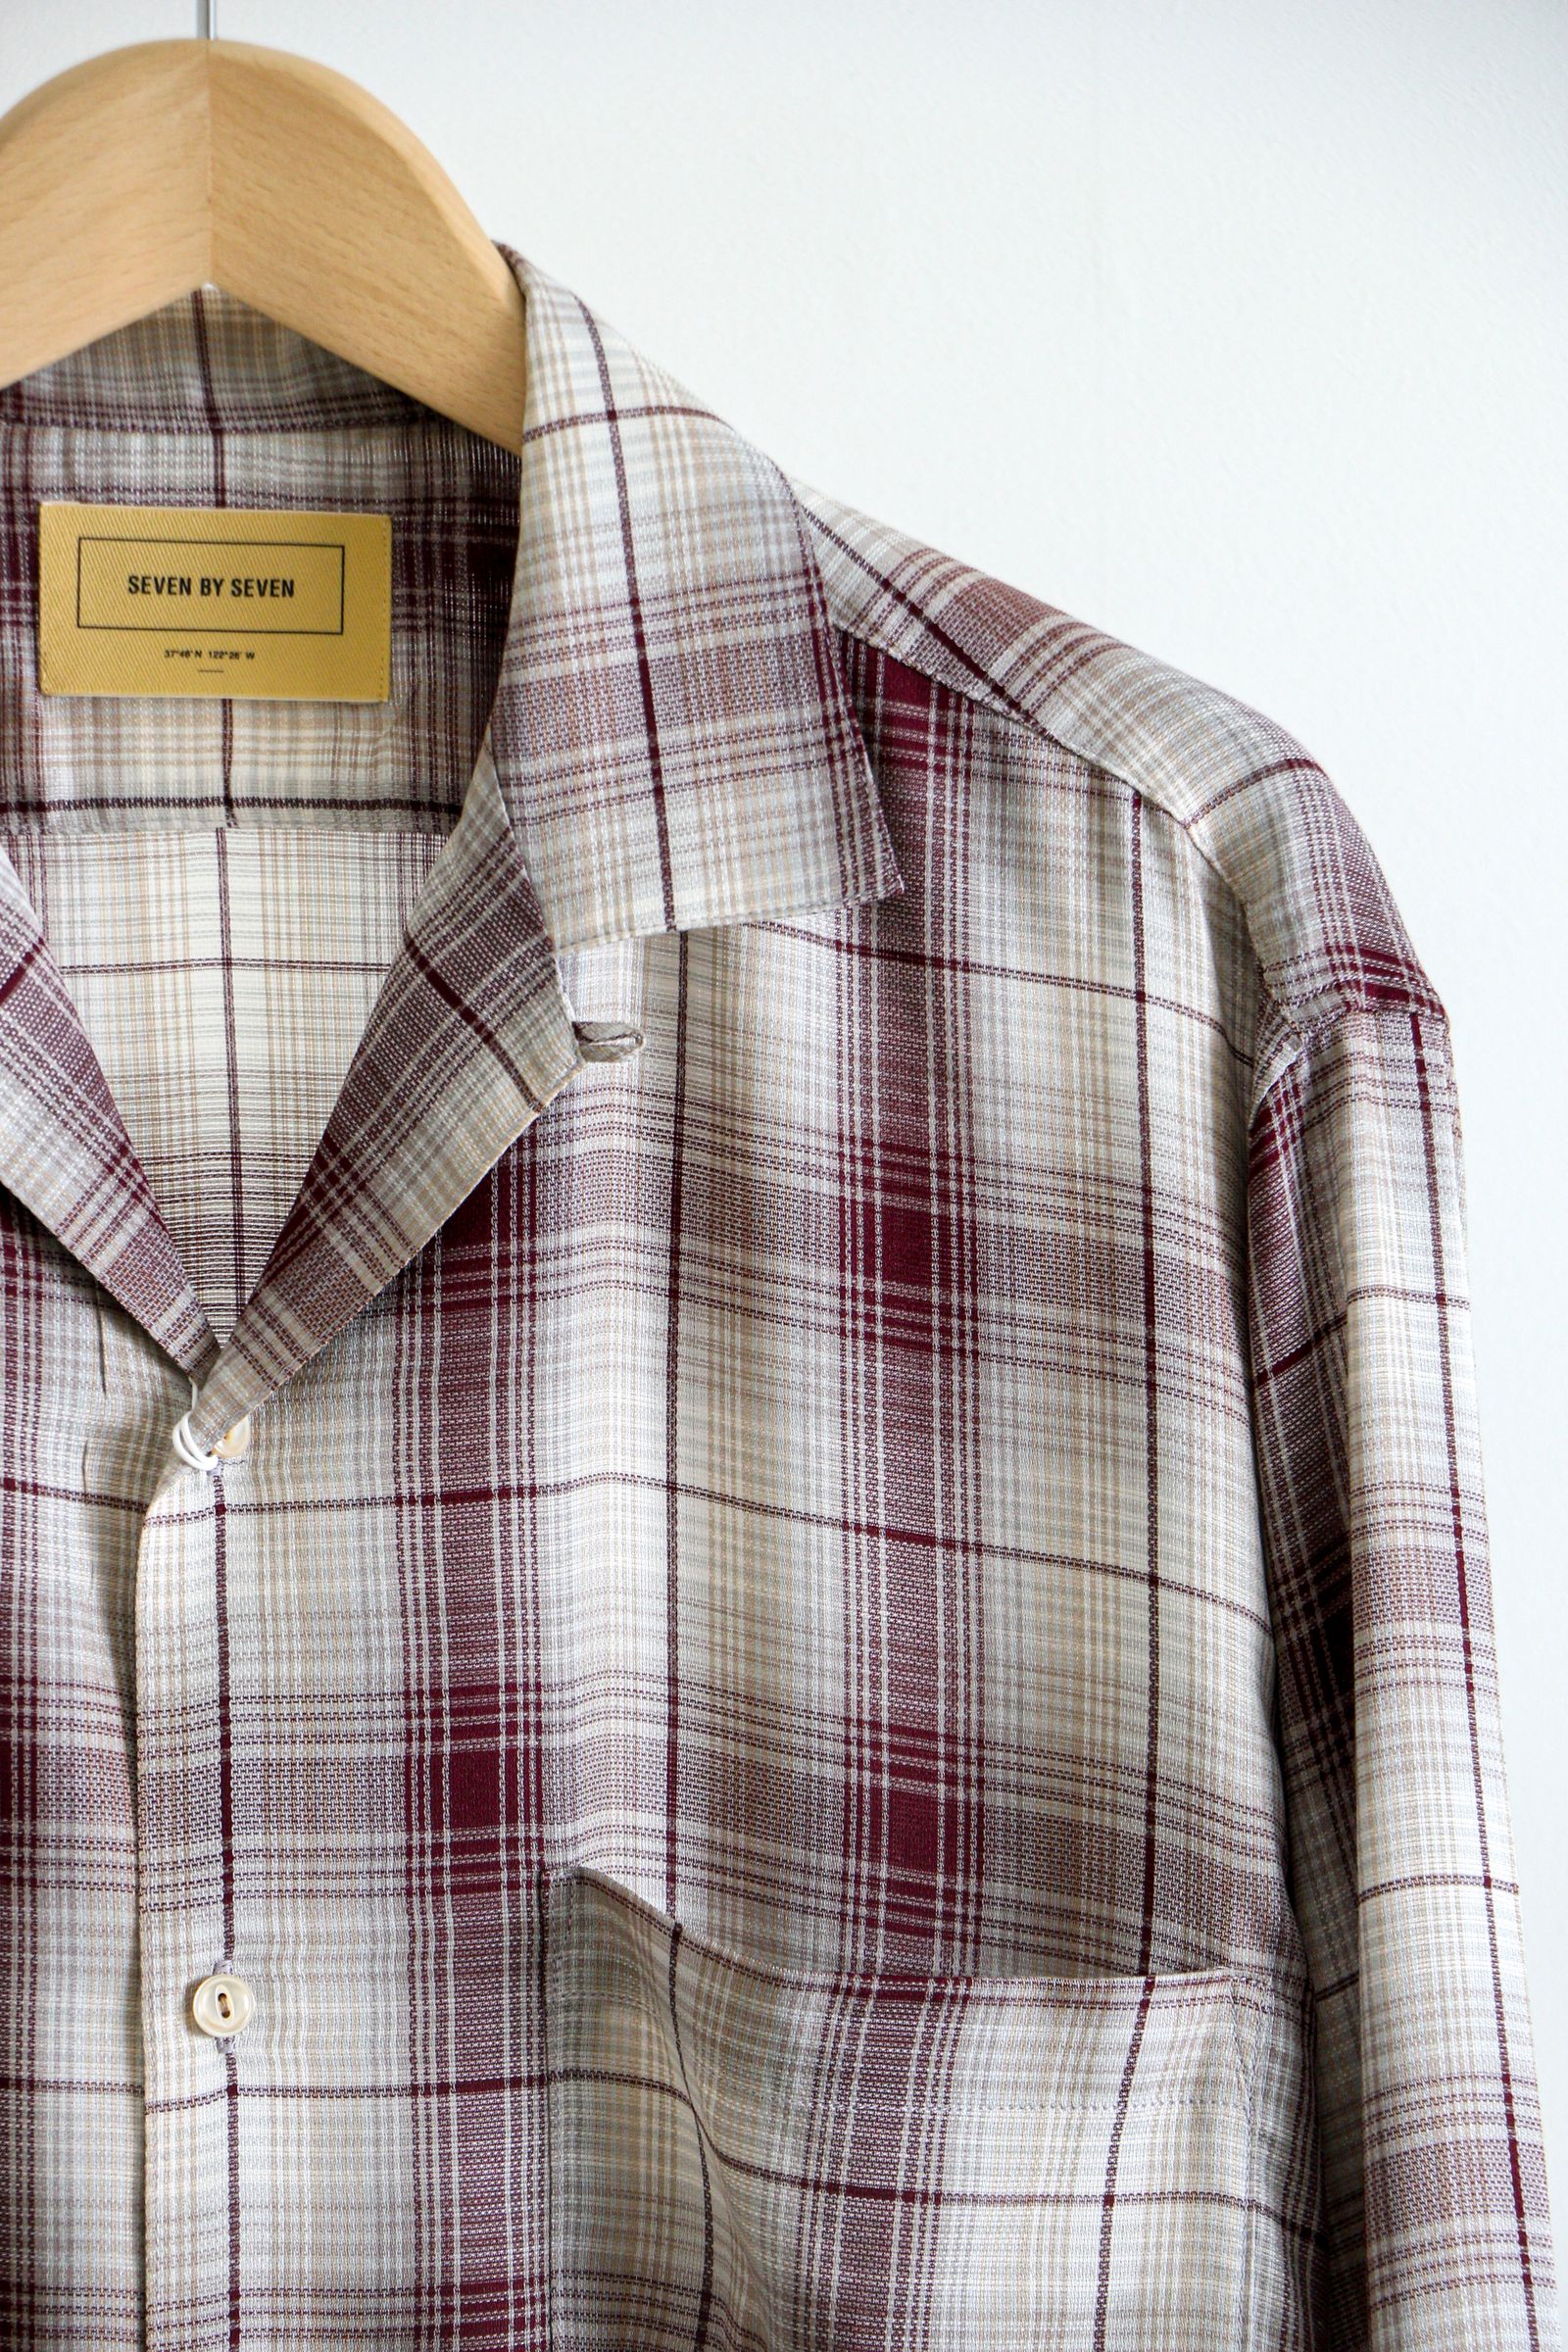 SEVEN BY SEVEN - EURO WORK SHIRTS - Modal panama check - RED